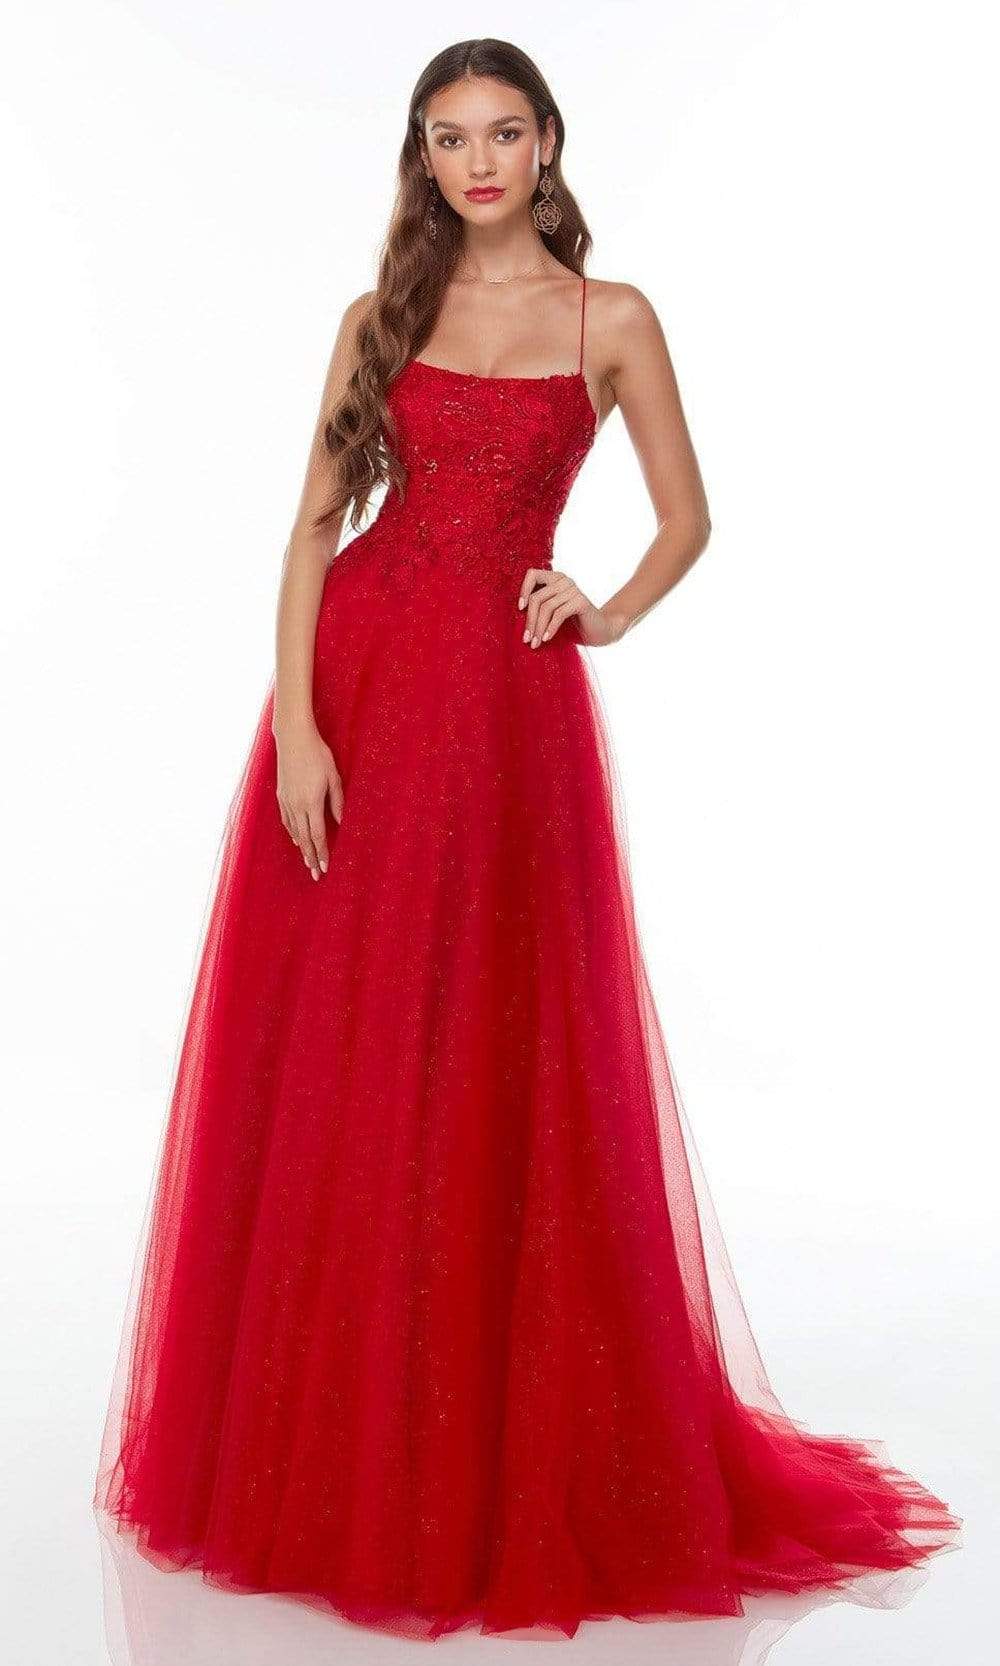 Alyce Paris - 61134 Spaghetti Straps Tulle Ballgown Formal Gowns 000 / Red